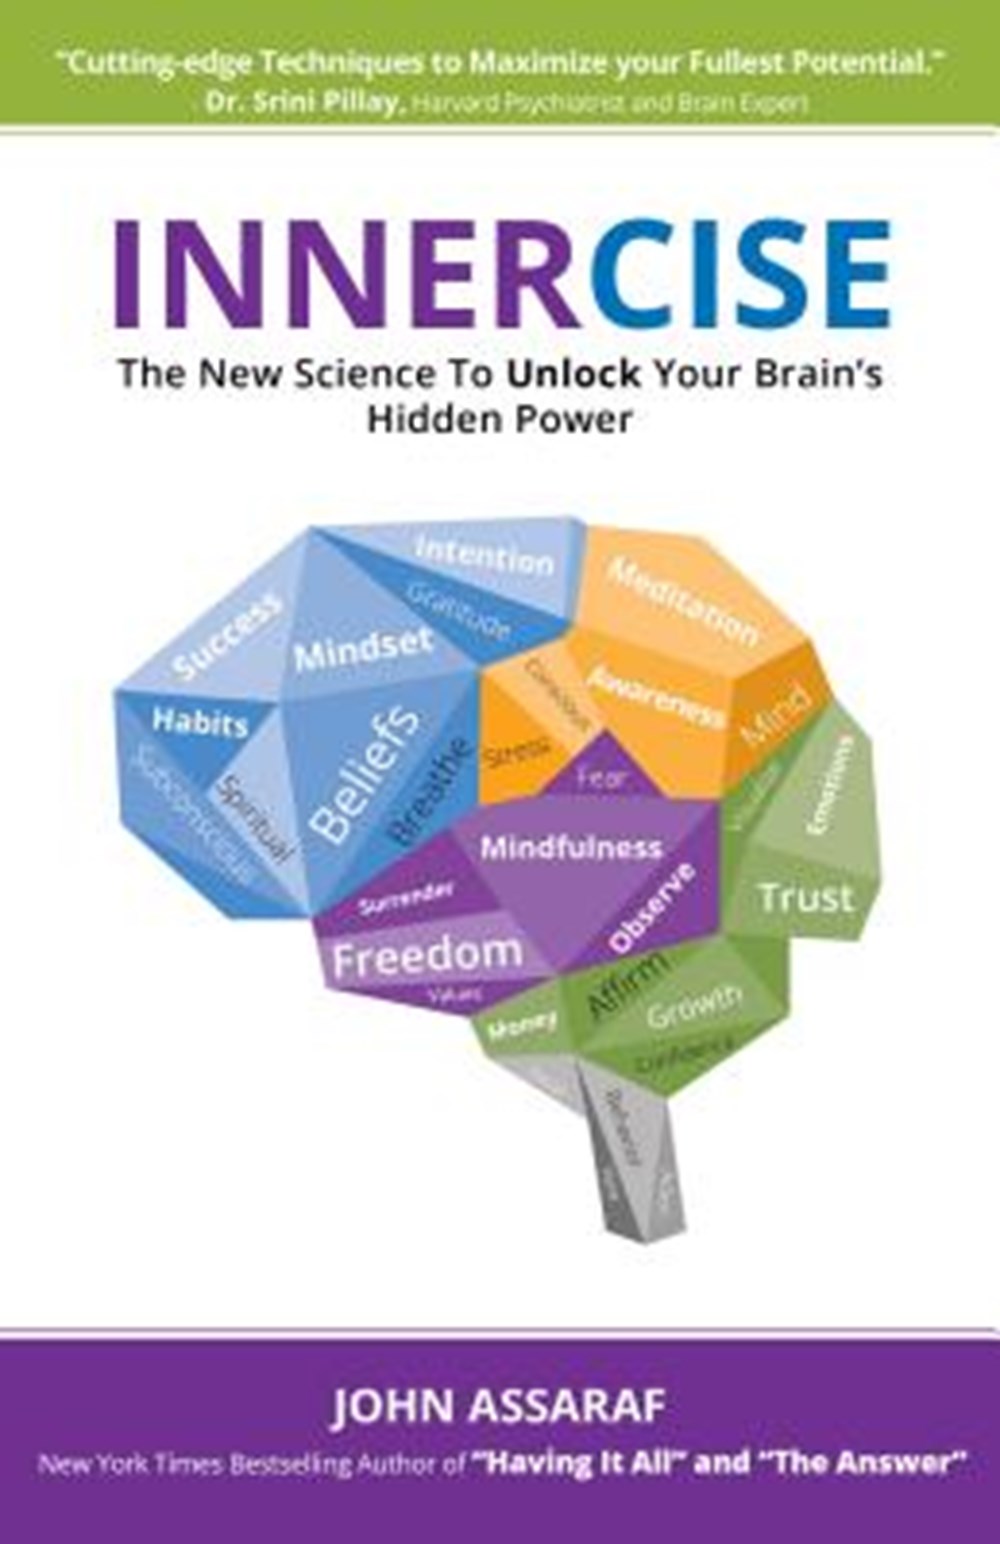 Innercise The New Science to Unlock Your Brain's Hidden Power